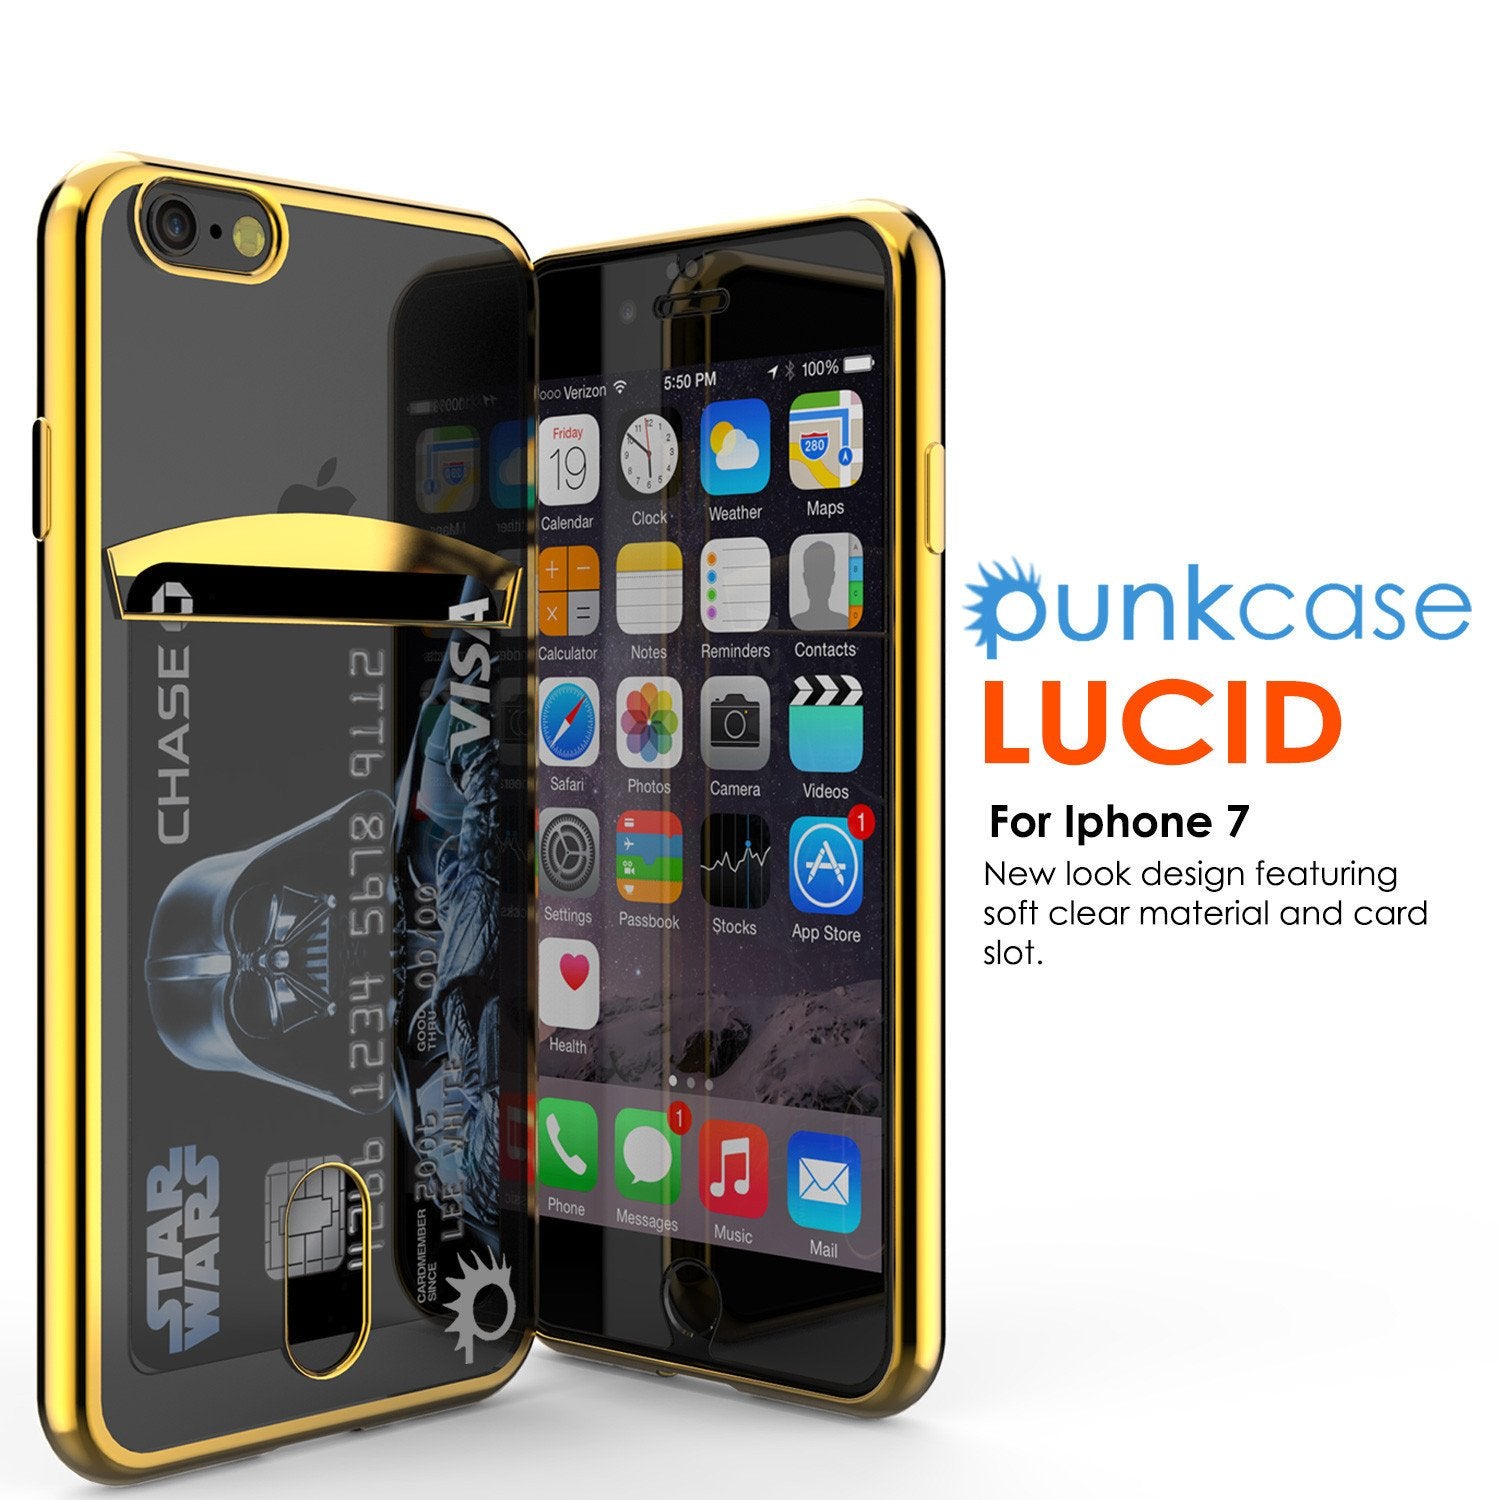 iPhone 7+ Plus Case, PUNKCASE® LUCID Gold Series for iPhone 7+ Plus Premium Impact Protective Armor Case Cover | Clear TPU | Lifetime Warranty Exchange | PUNK SHIELD Screen Protector | Ultra Fit